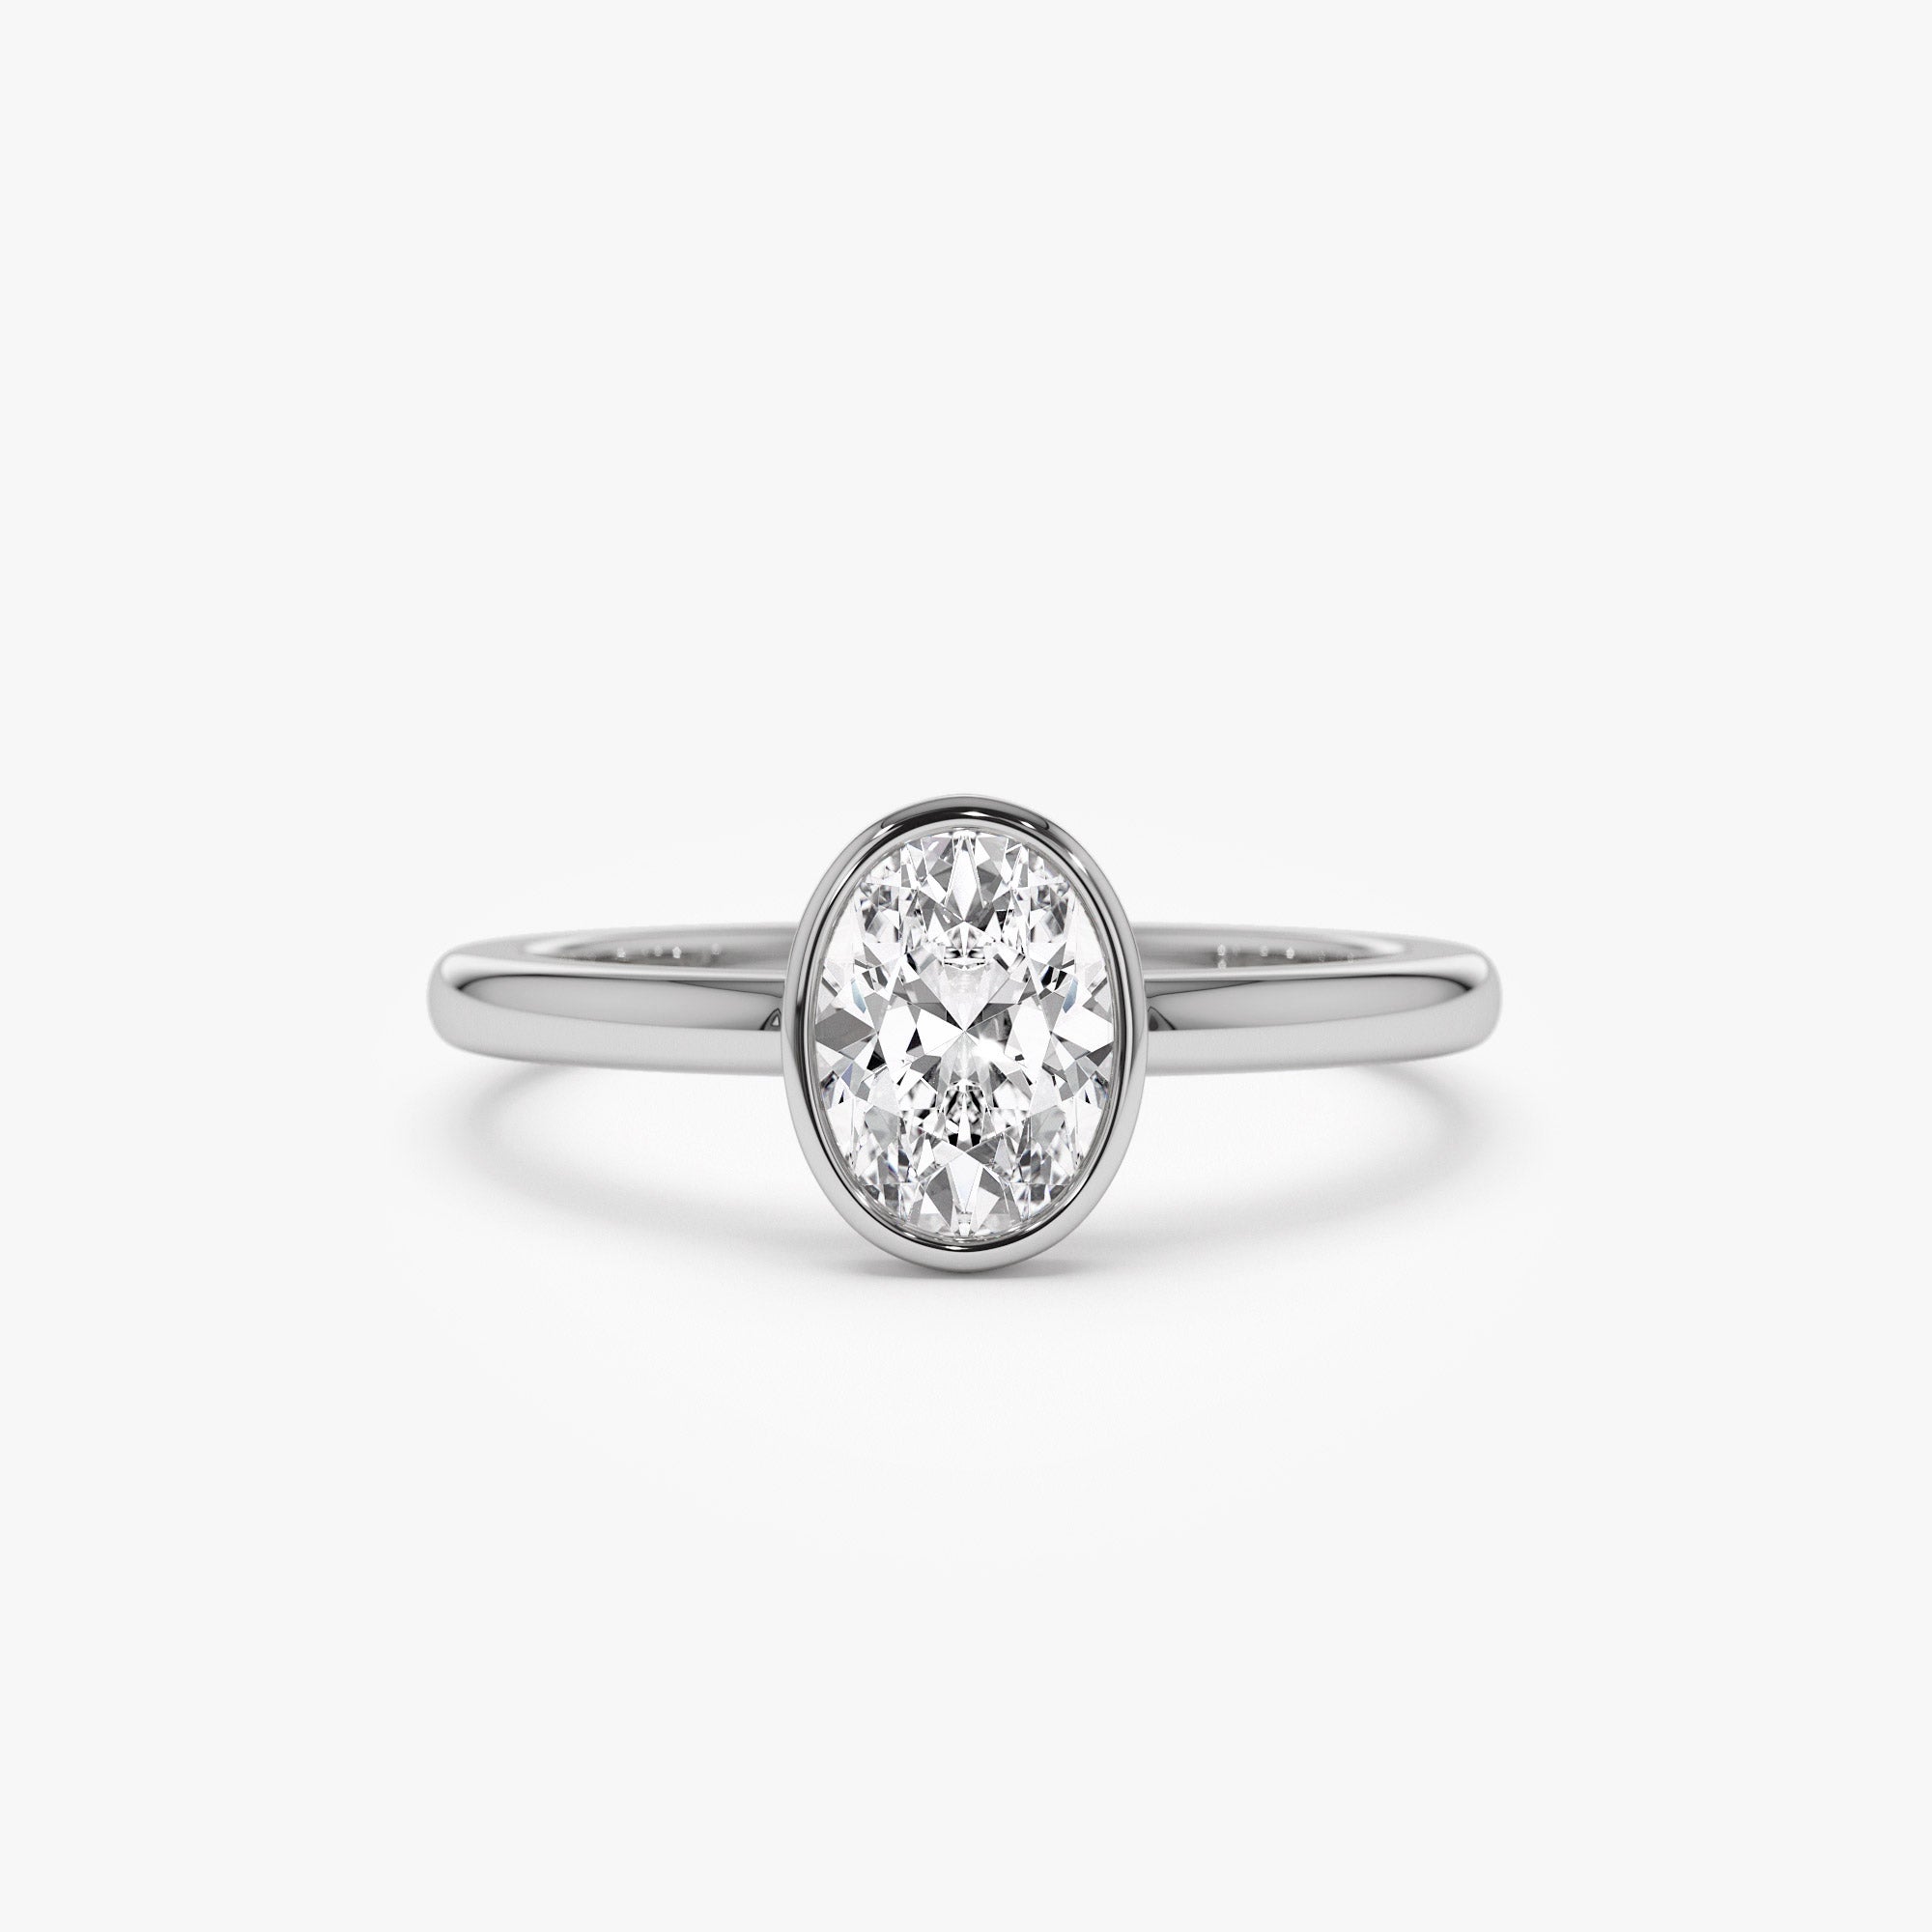 5.5 Ctw Solitaire Oval Engagement Ring in 18K Gold